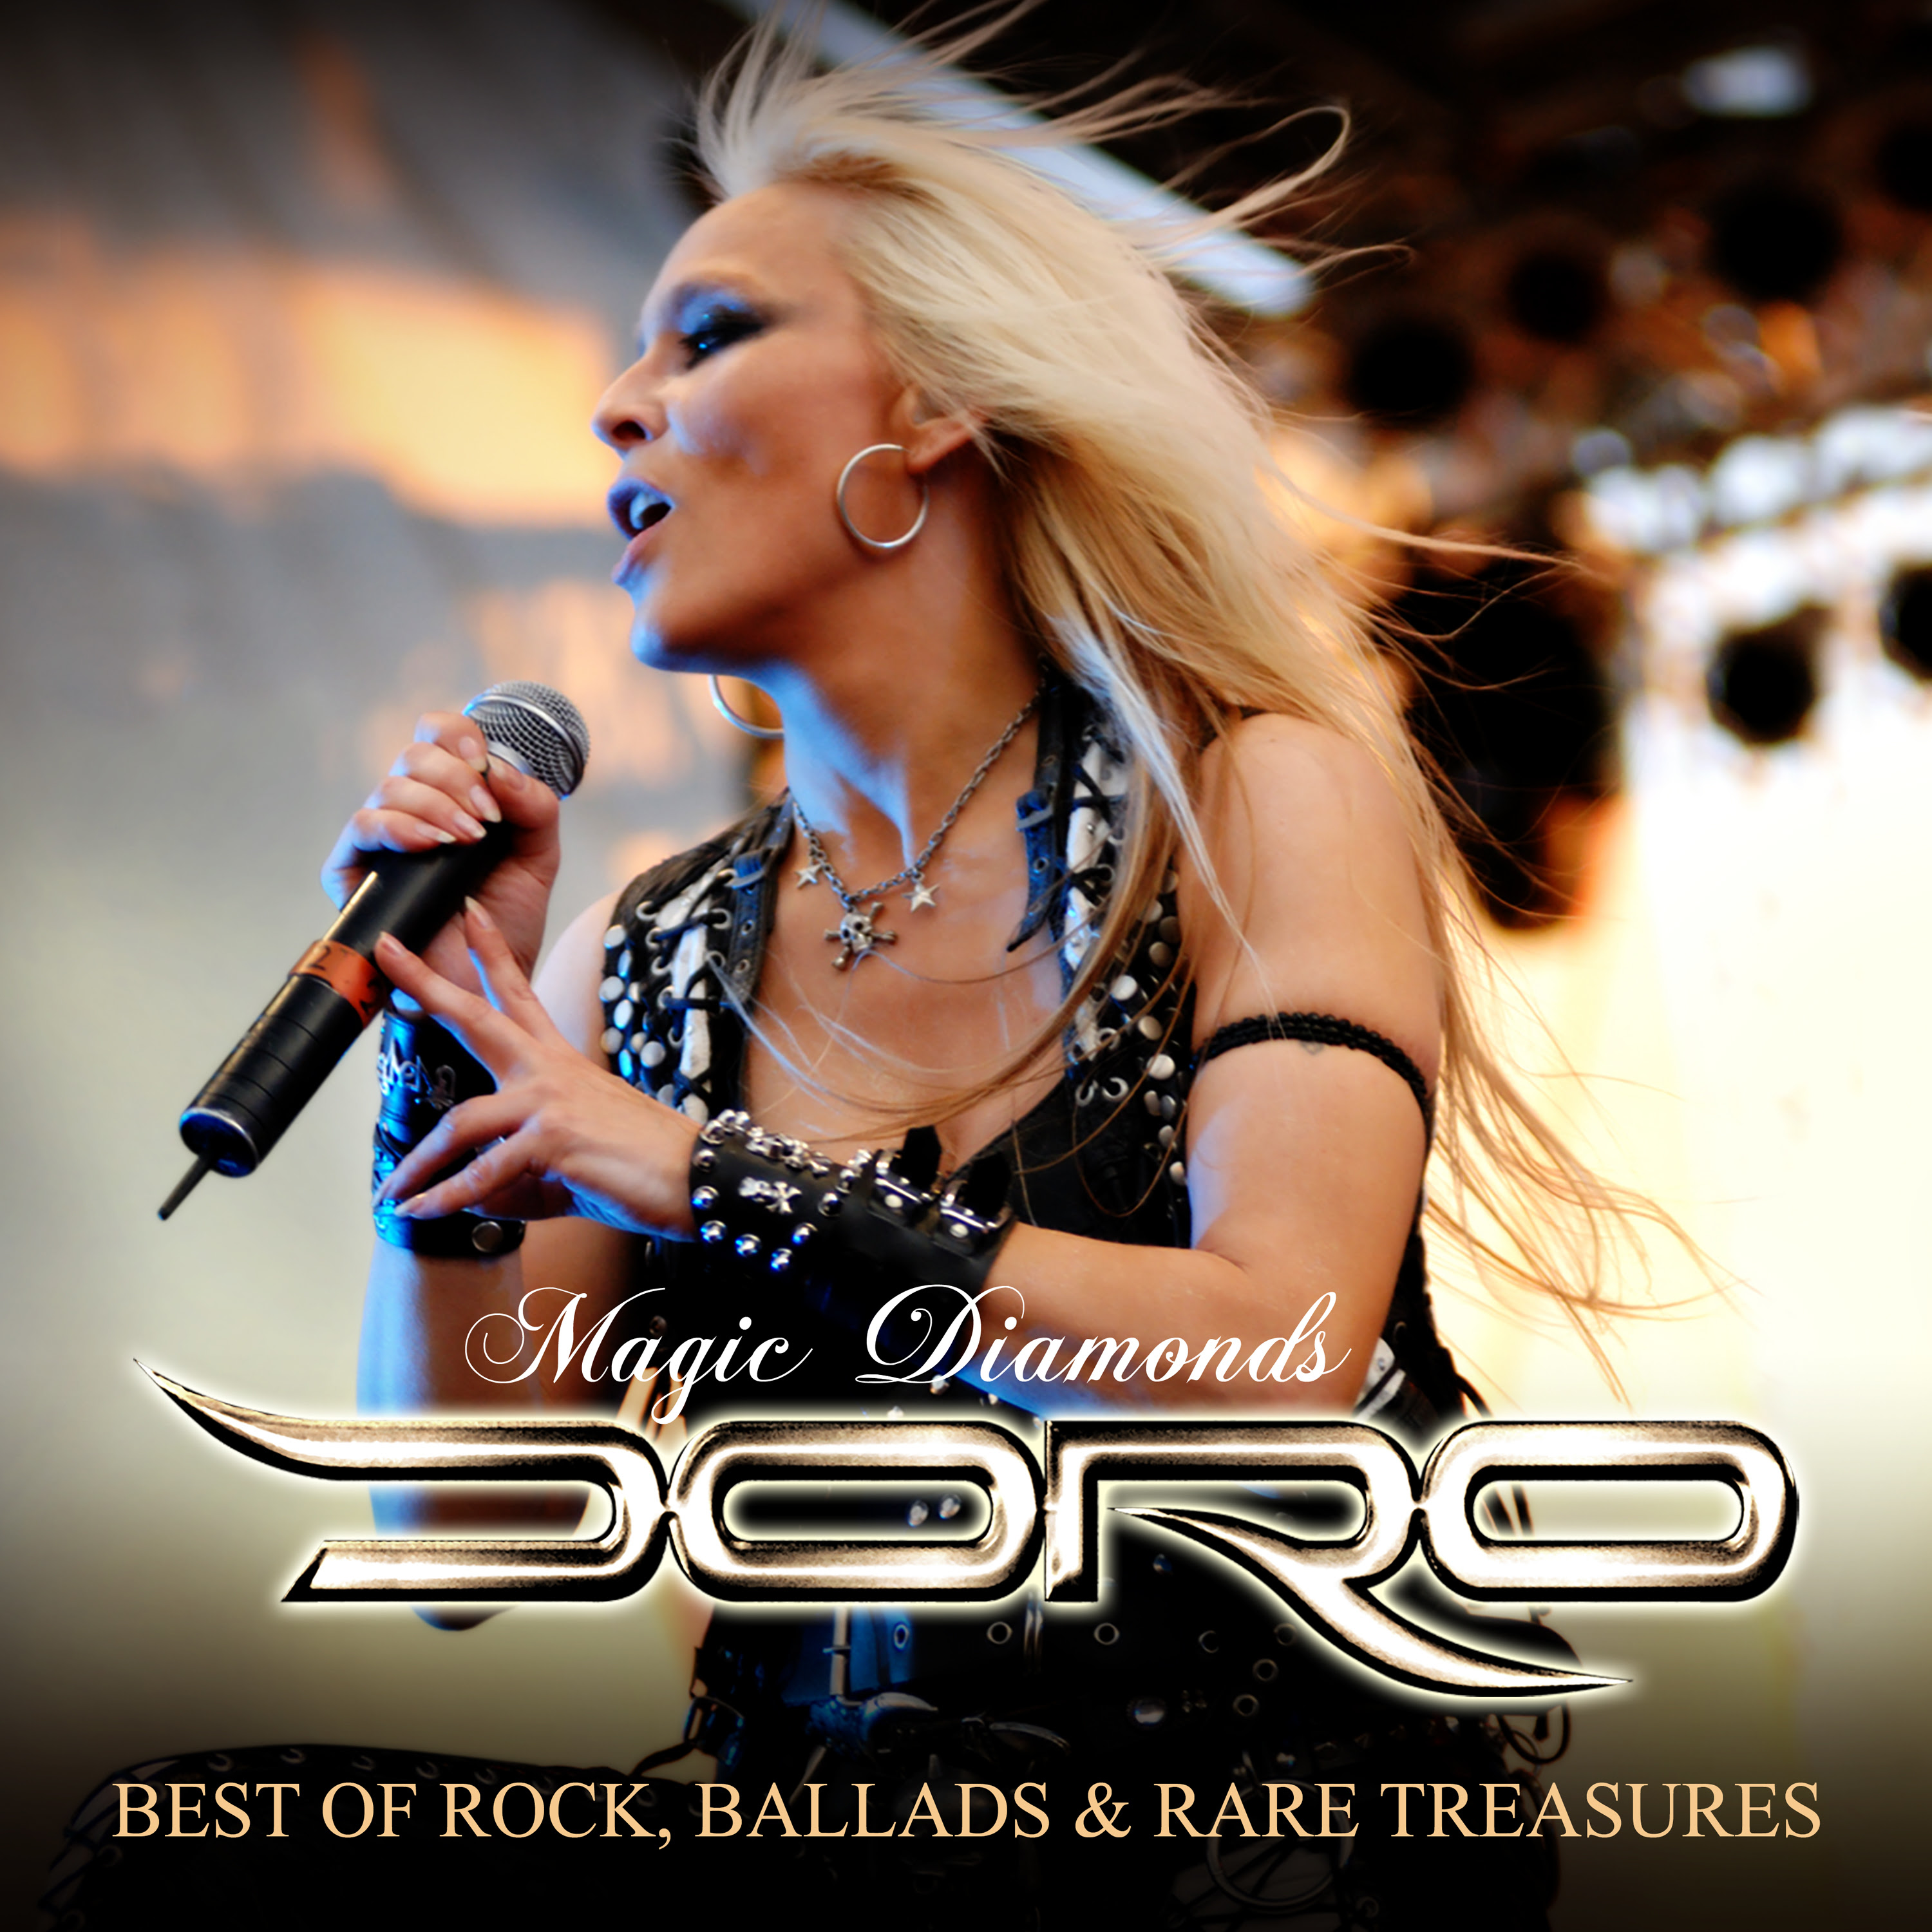 DORO to release special bestof boxset featuring nearly four hours of